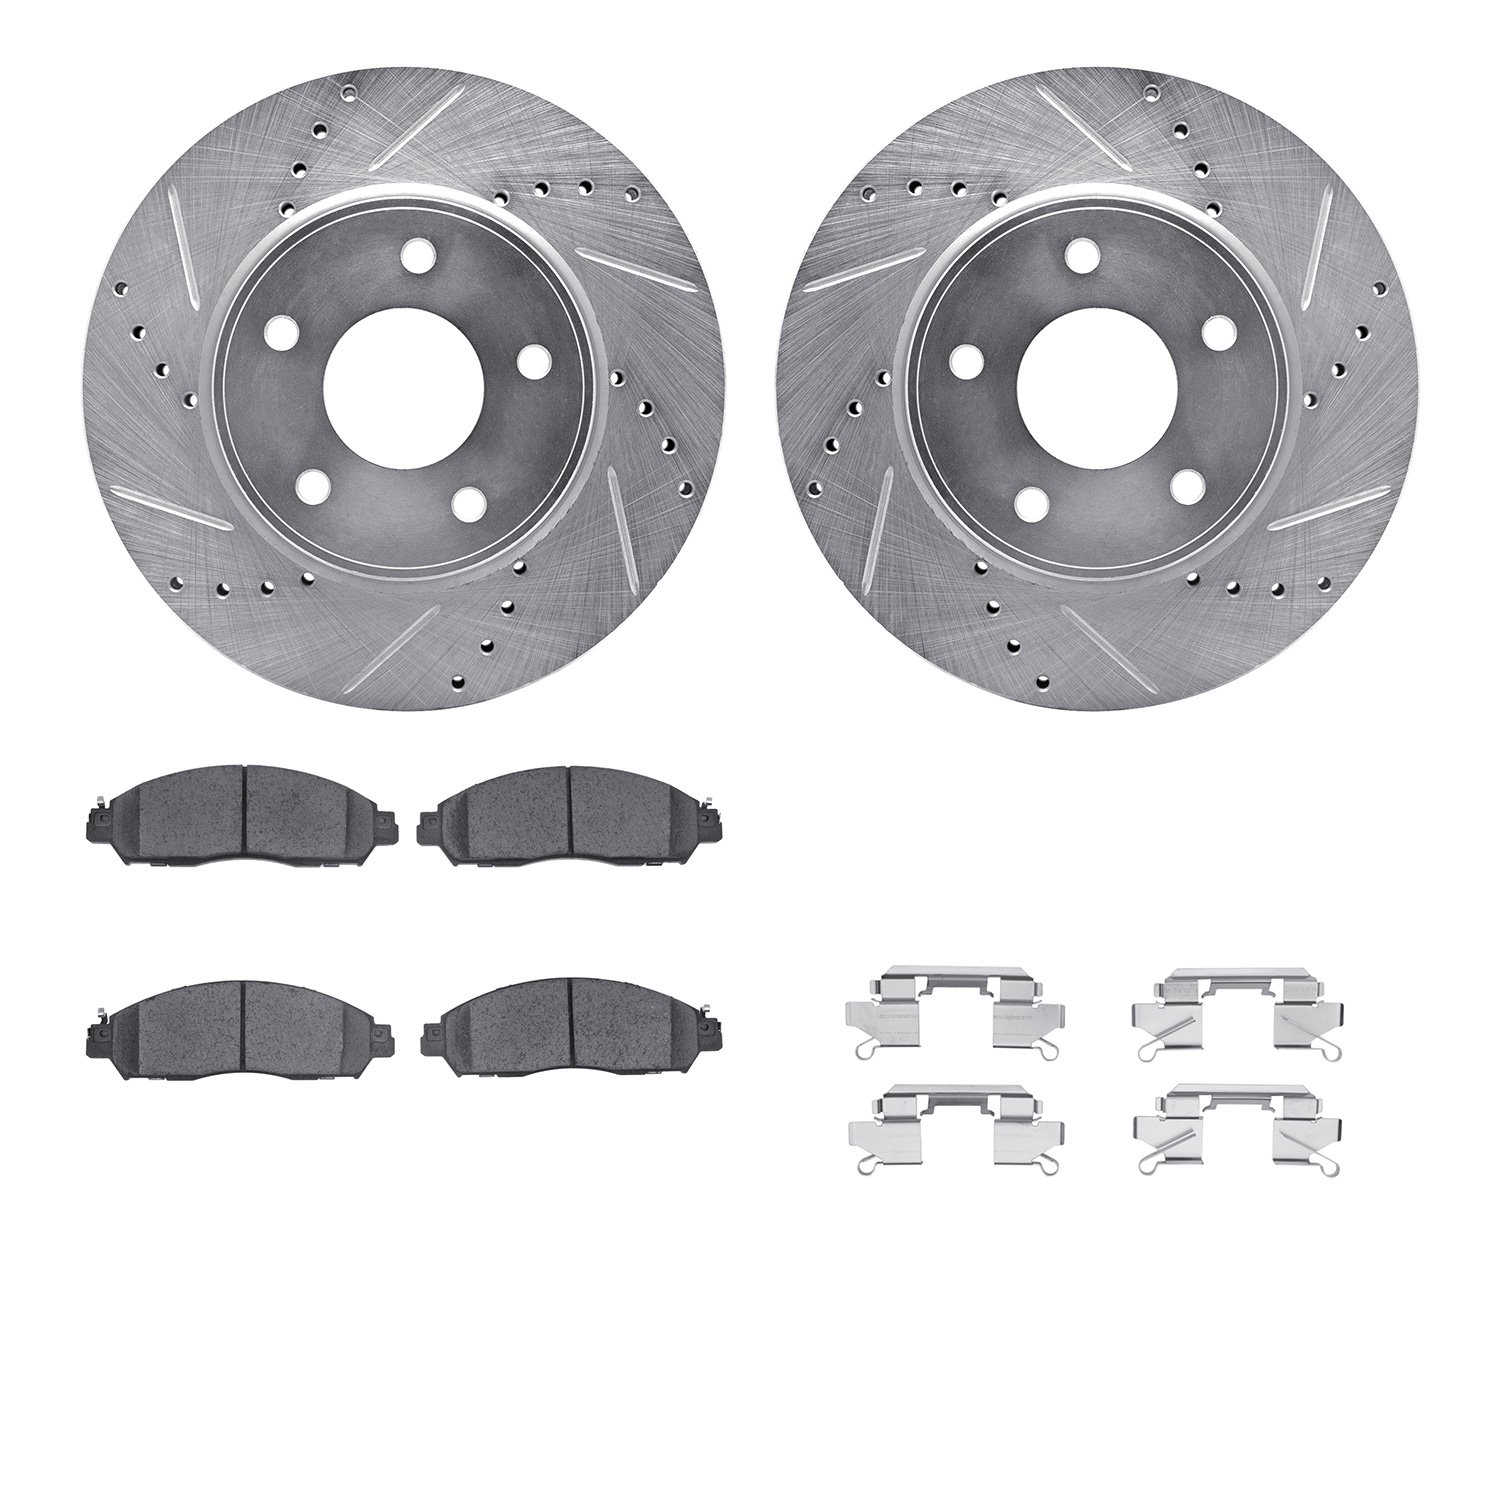 7512-67109 Drilled/Slotted Brake Rotors w/5000 Advanced Brake Pads Kit & Hardware [Silver], Fits Select Infiniti/Nissan, Positio